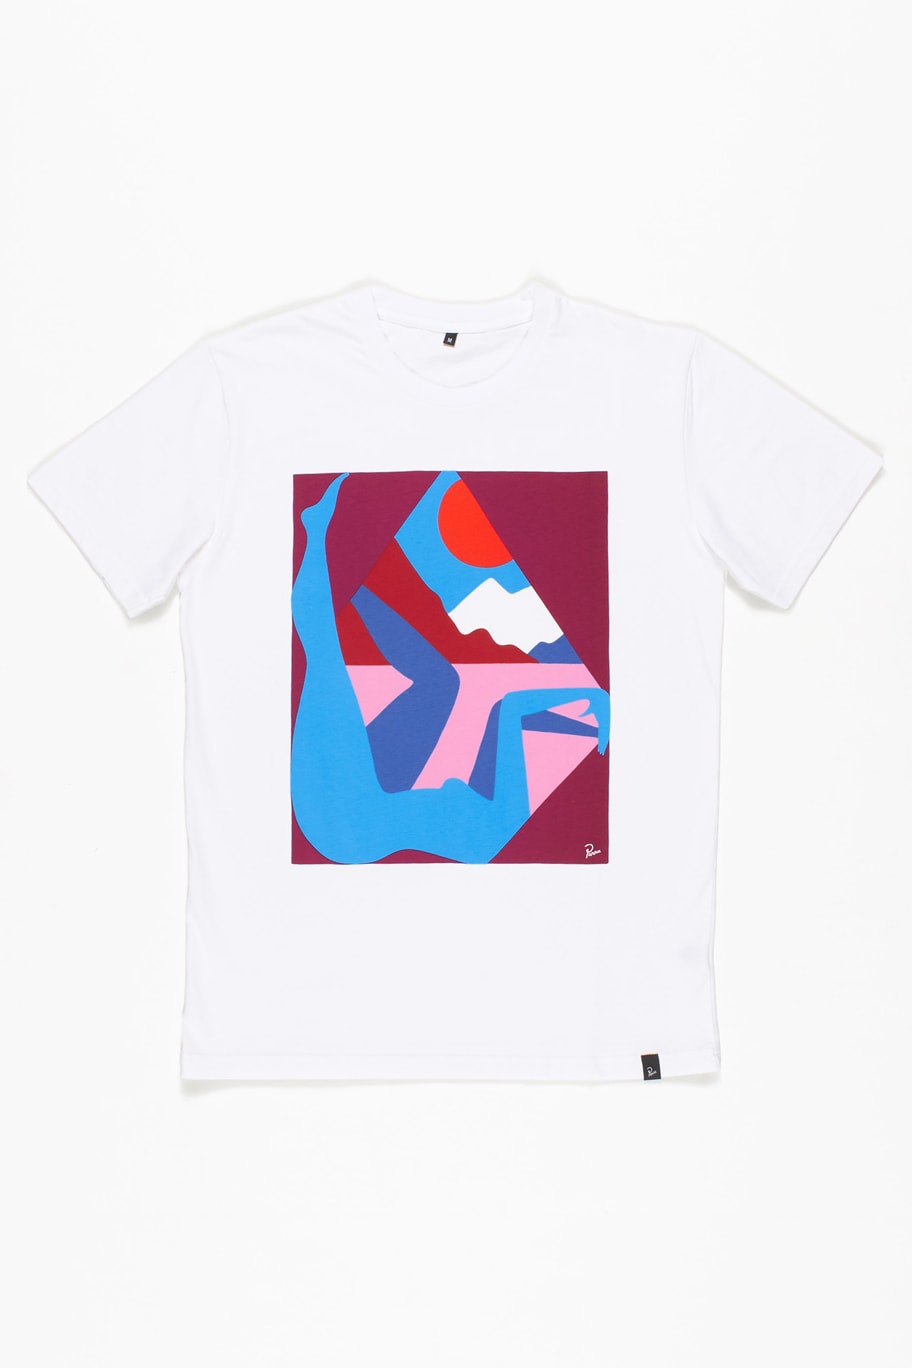 Parra Fall 2018 Collection 